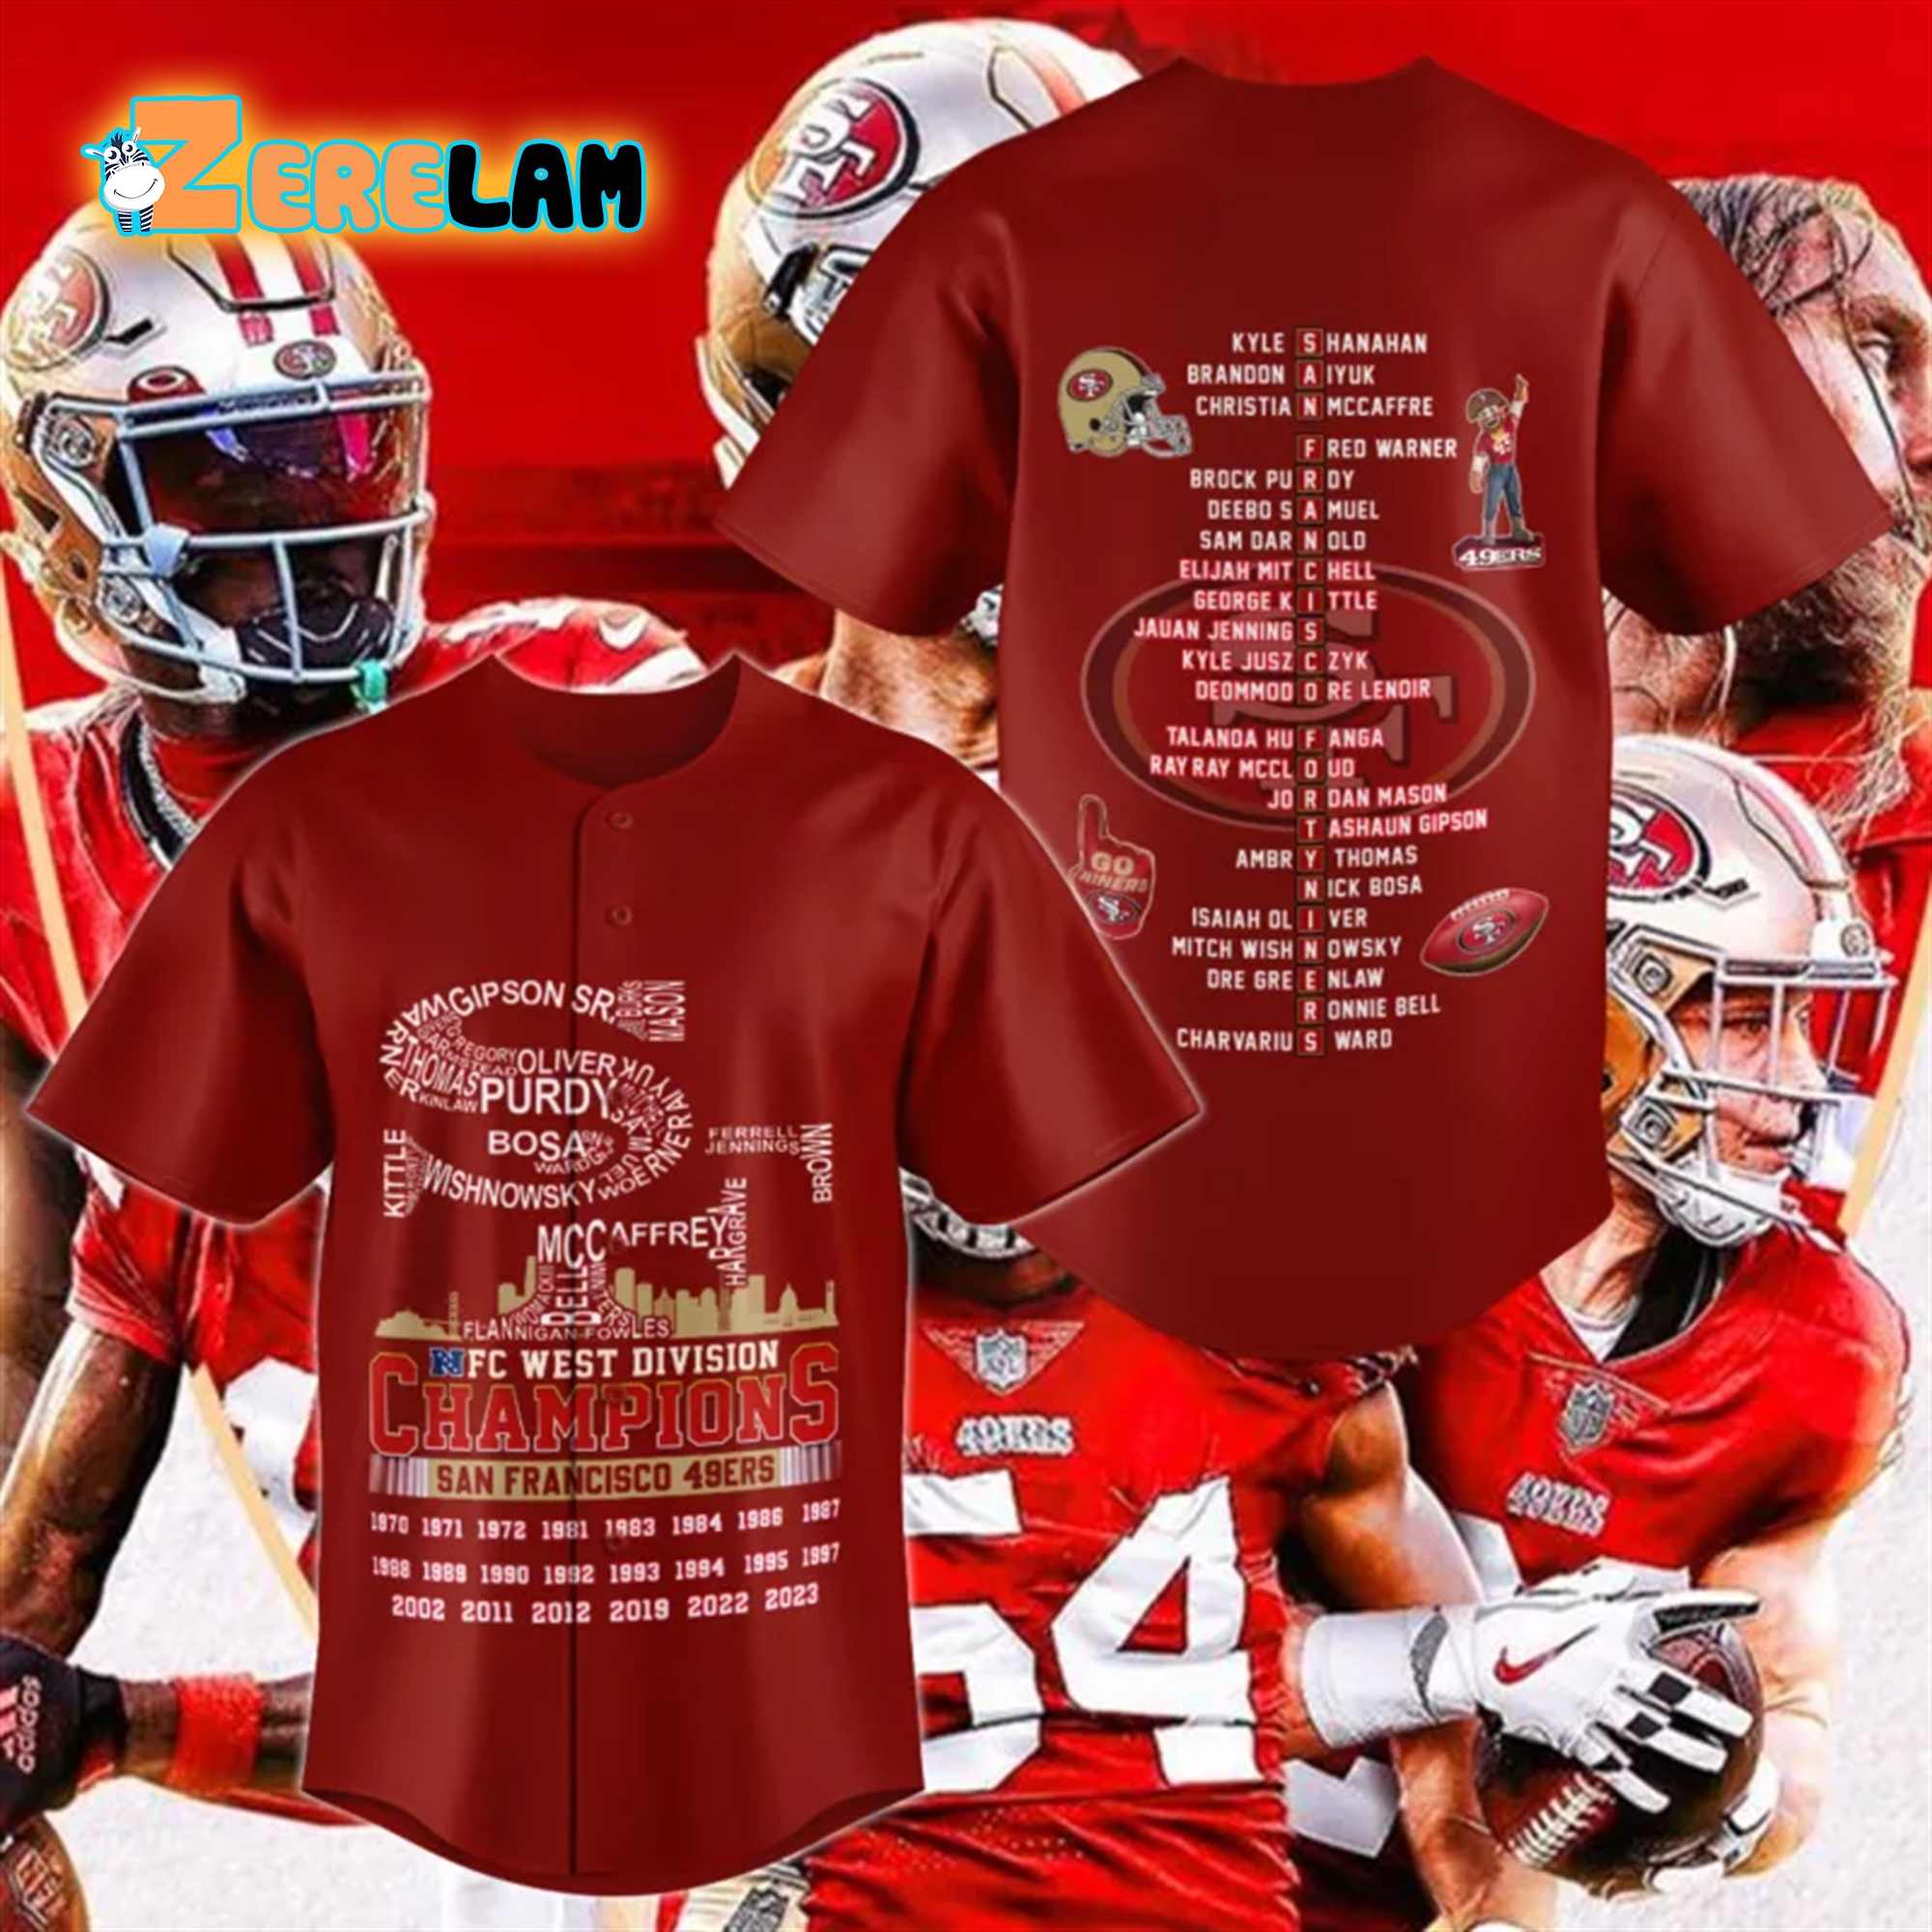 SF49E 2023 NFC West Division Champions Baseball Jersey - Zerelam